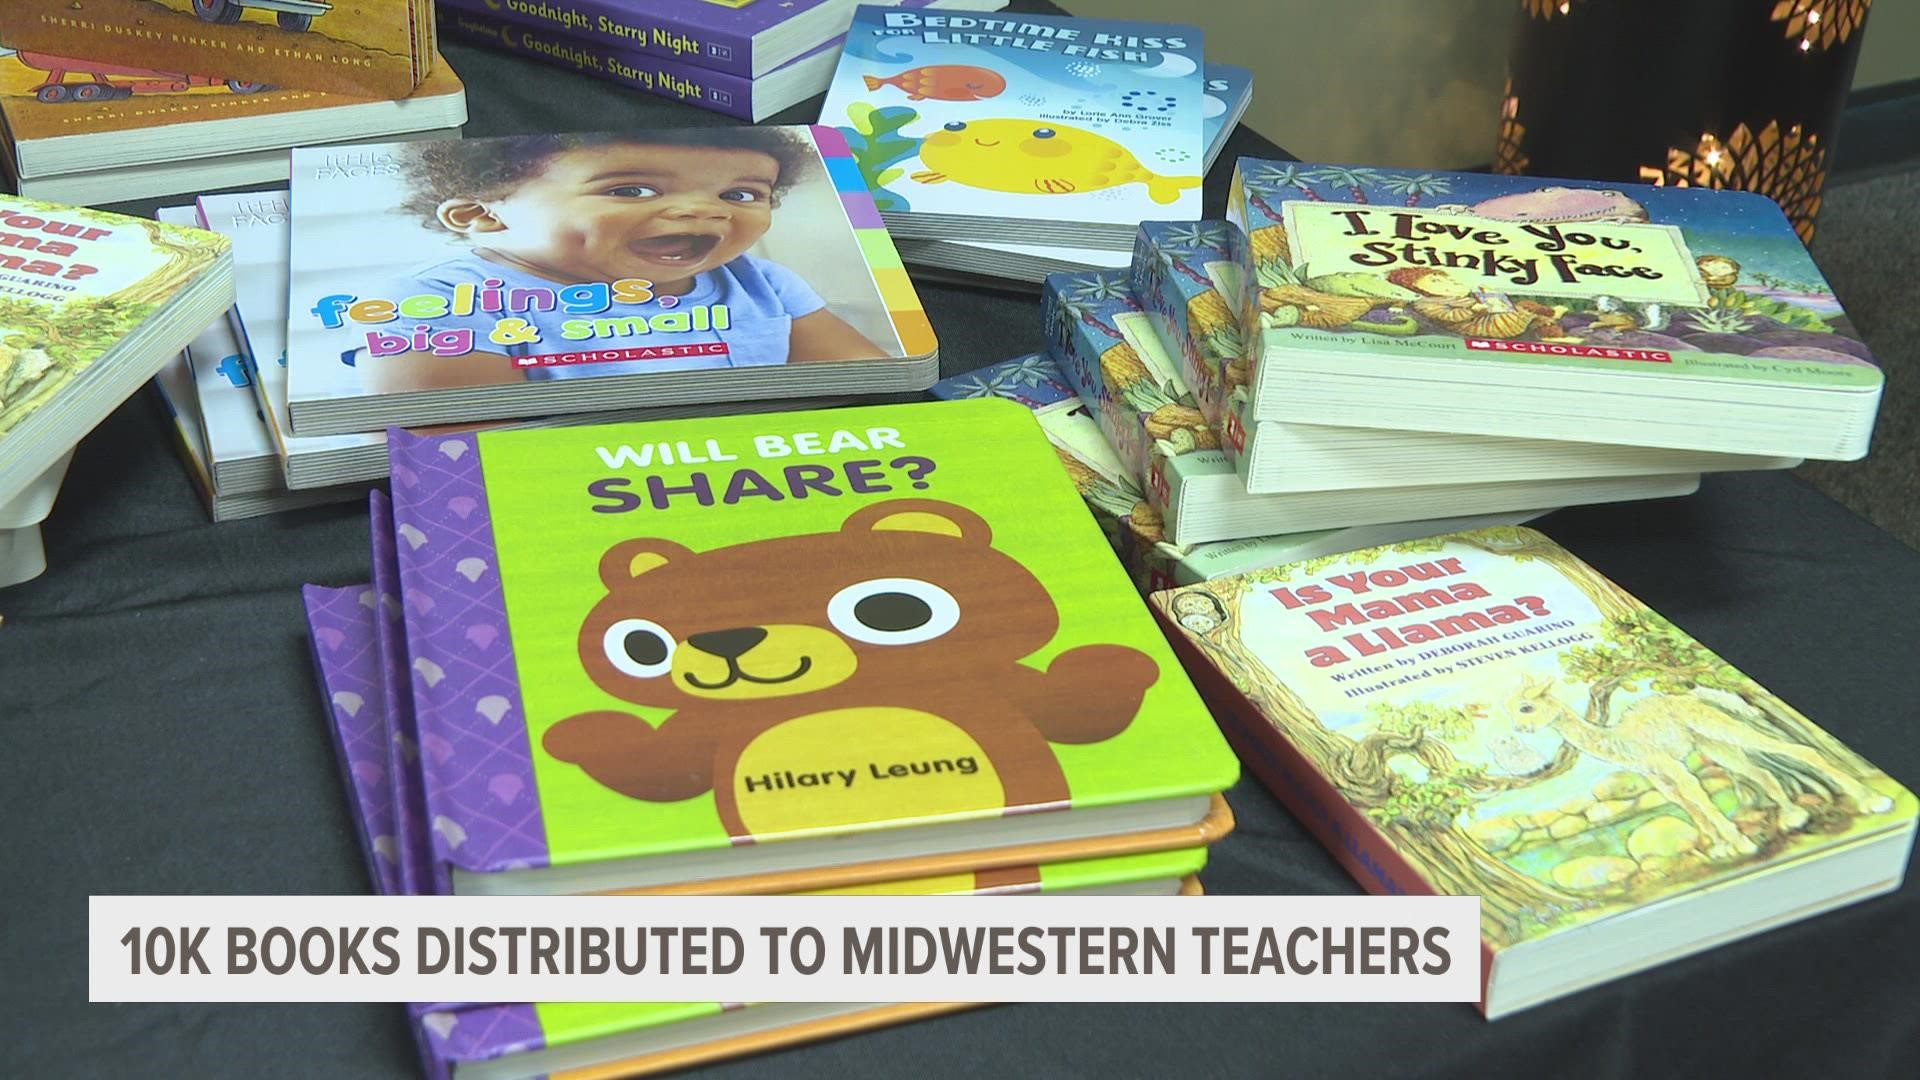 10,000 books were donated to teachers across the midwest thanks to a Meijer book drive.